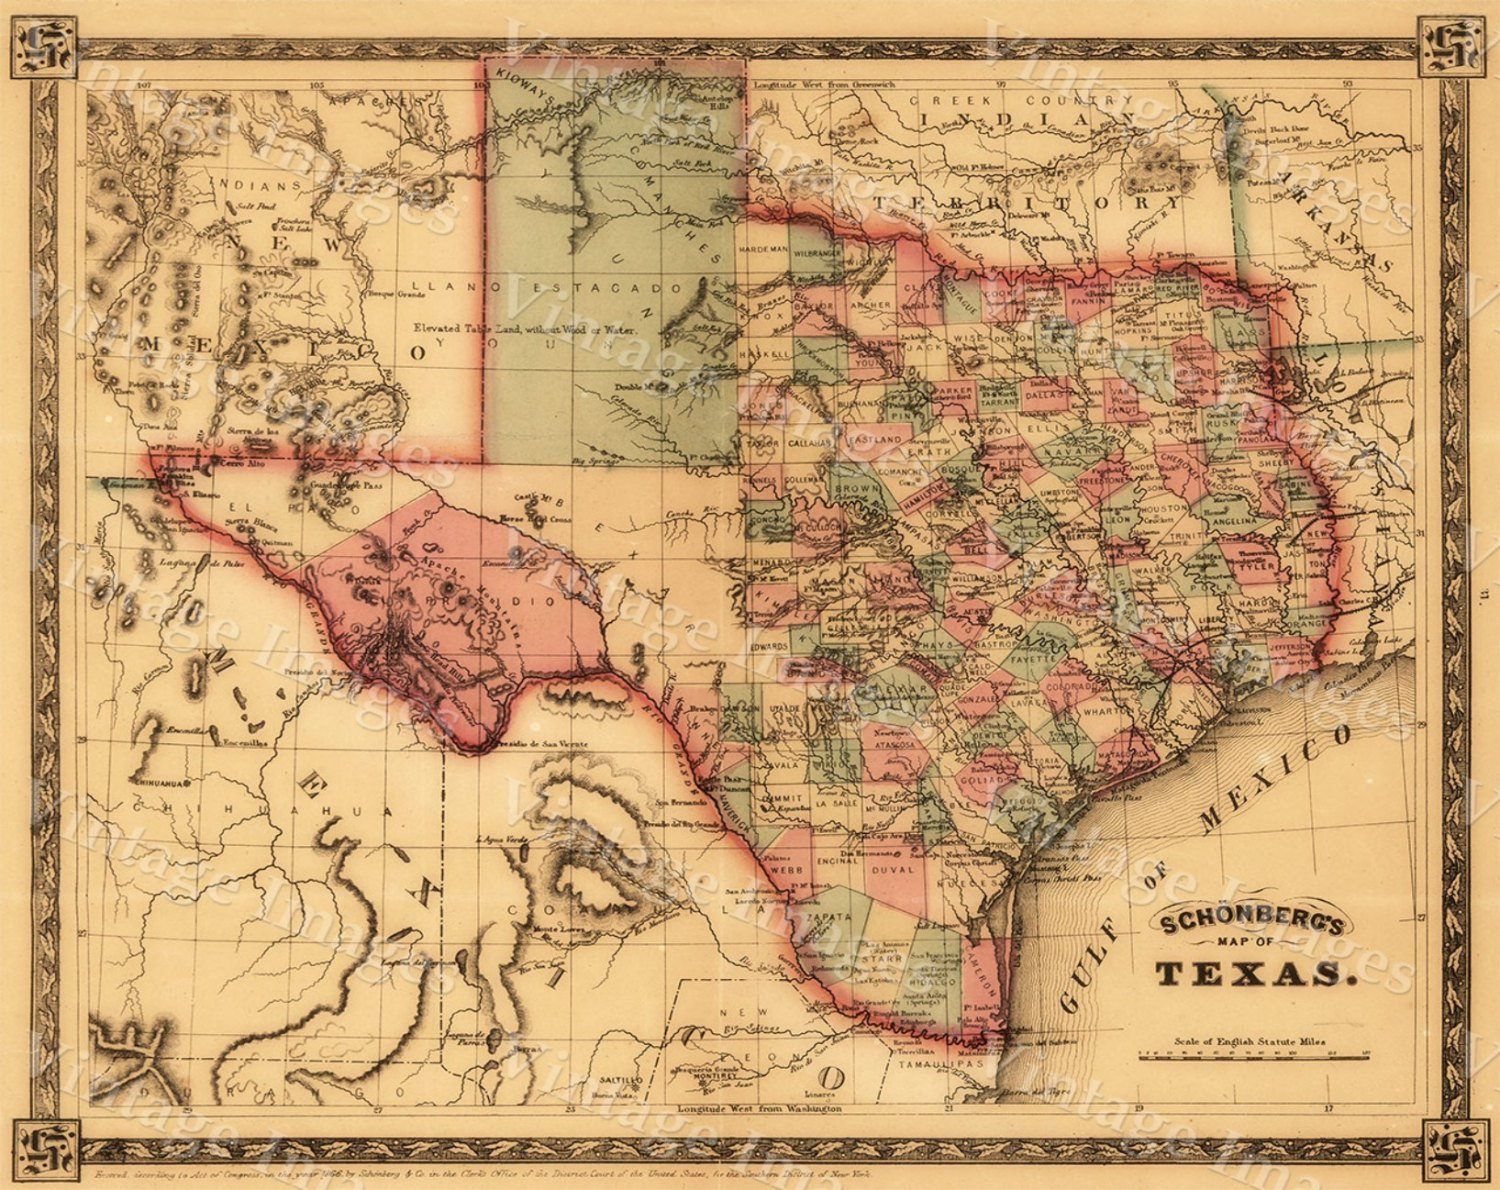 Texas Map Giant 1866 Old Texas Map Old West Map Antique | Etsy - Antique Texas Maps For Sale